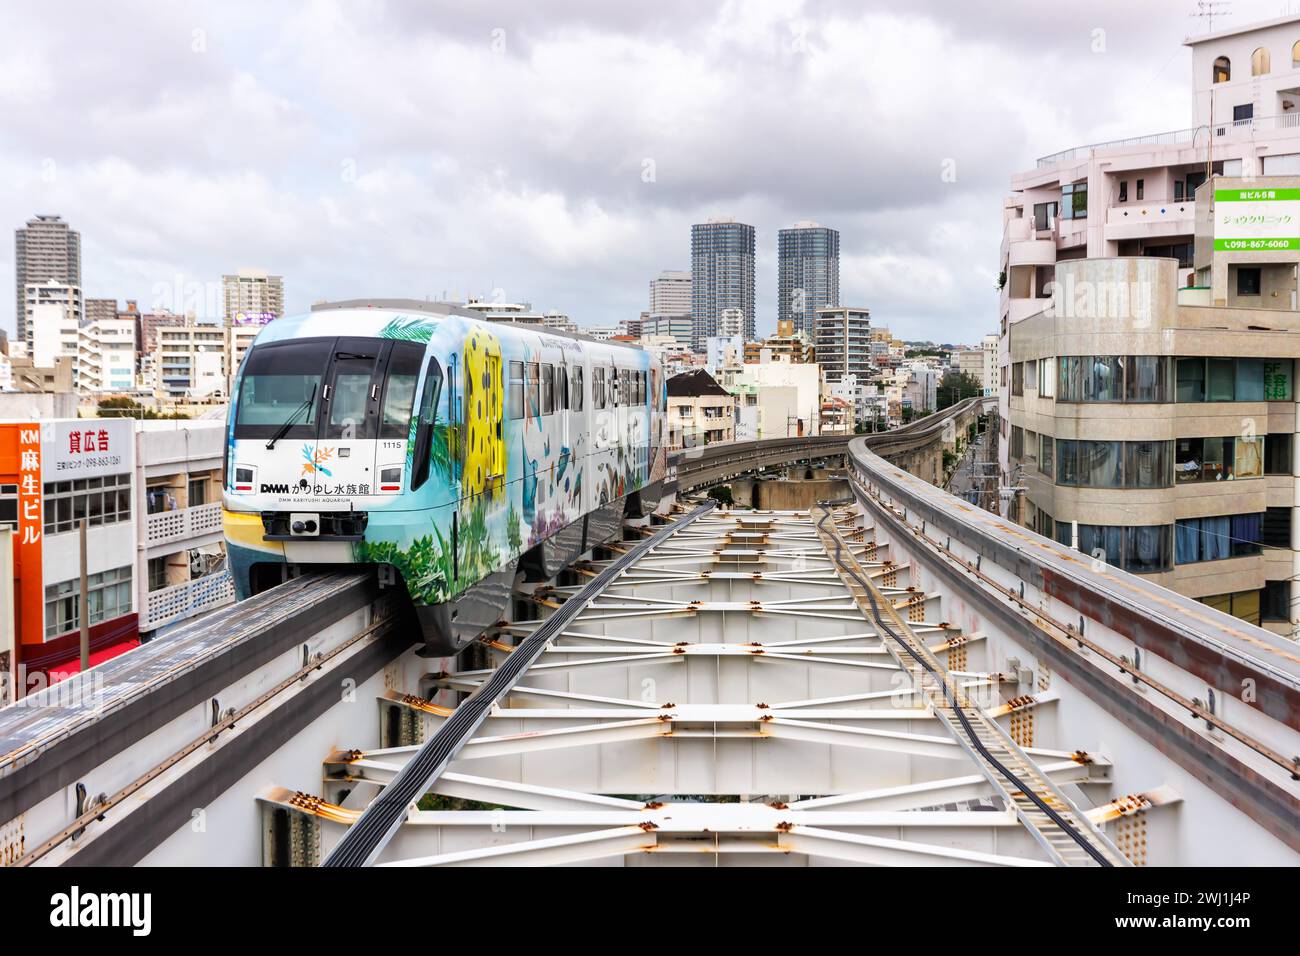 Okinawa Monorail train of the local monorail system in Naha, Japan Stock Photo